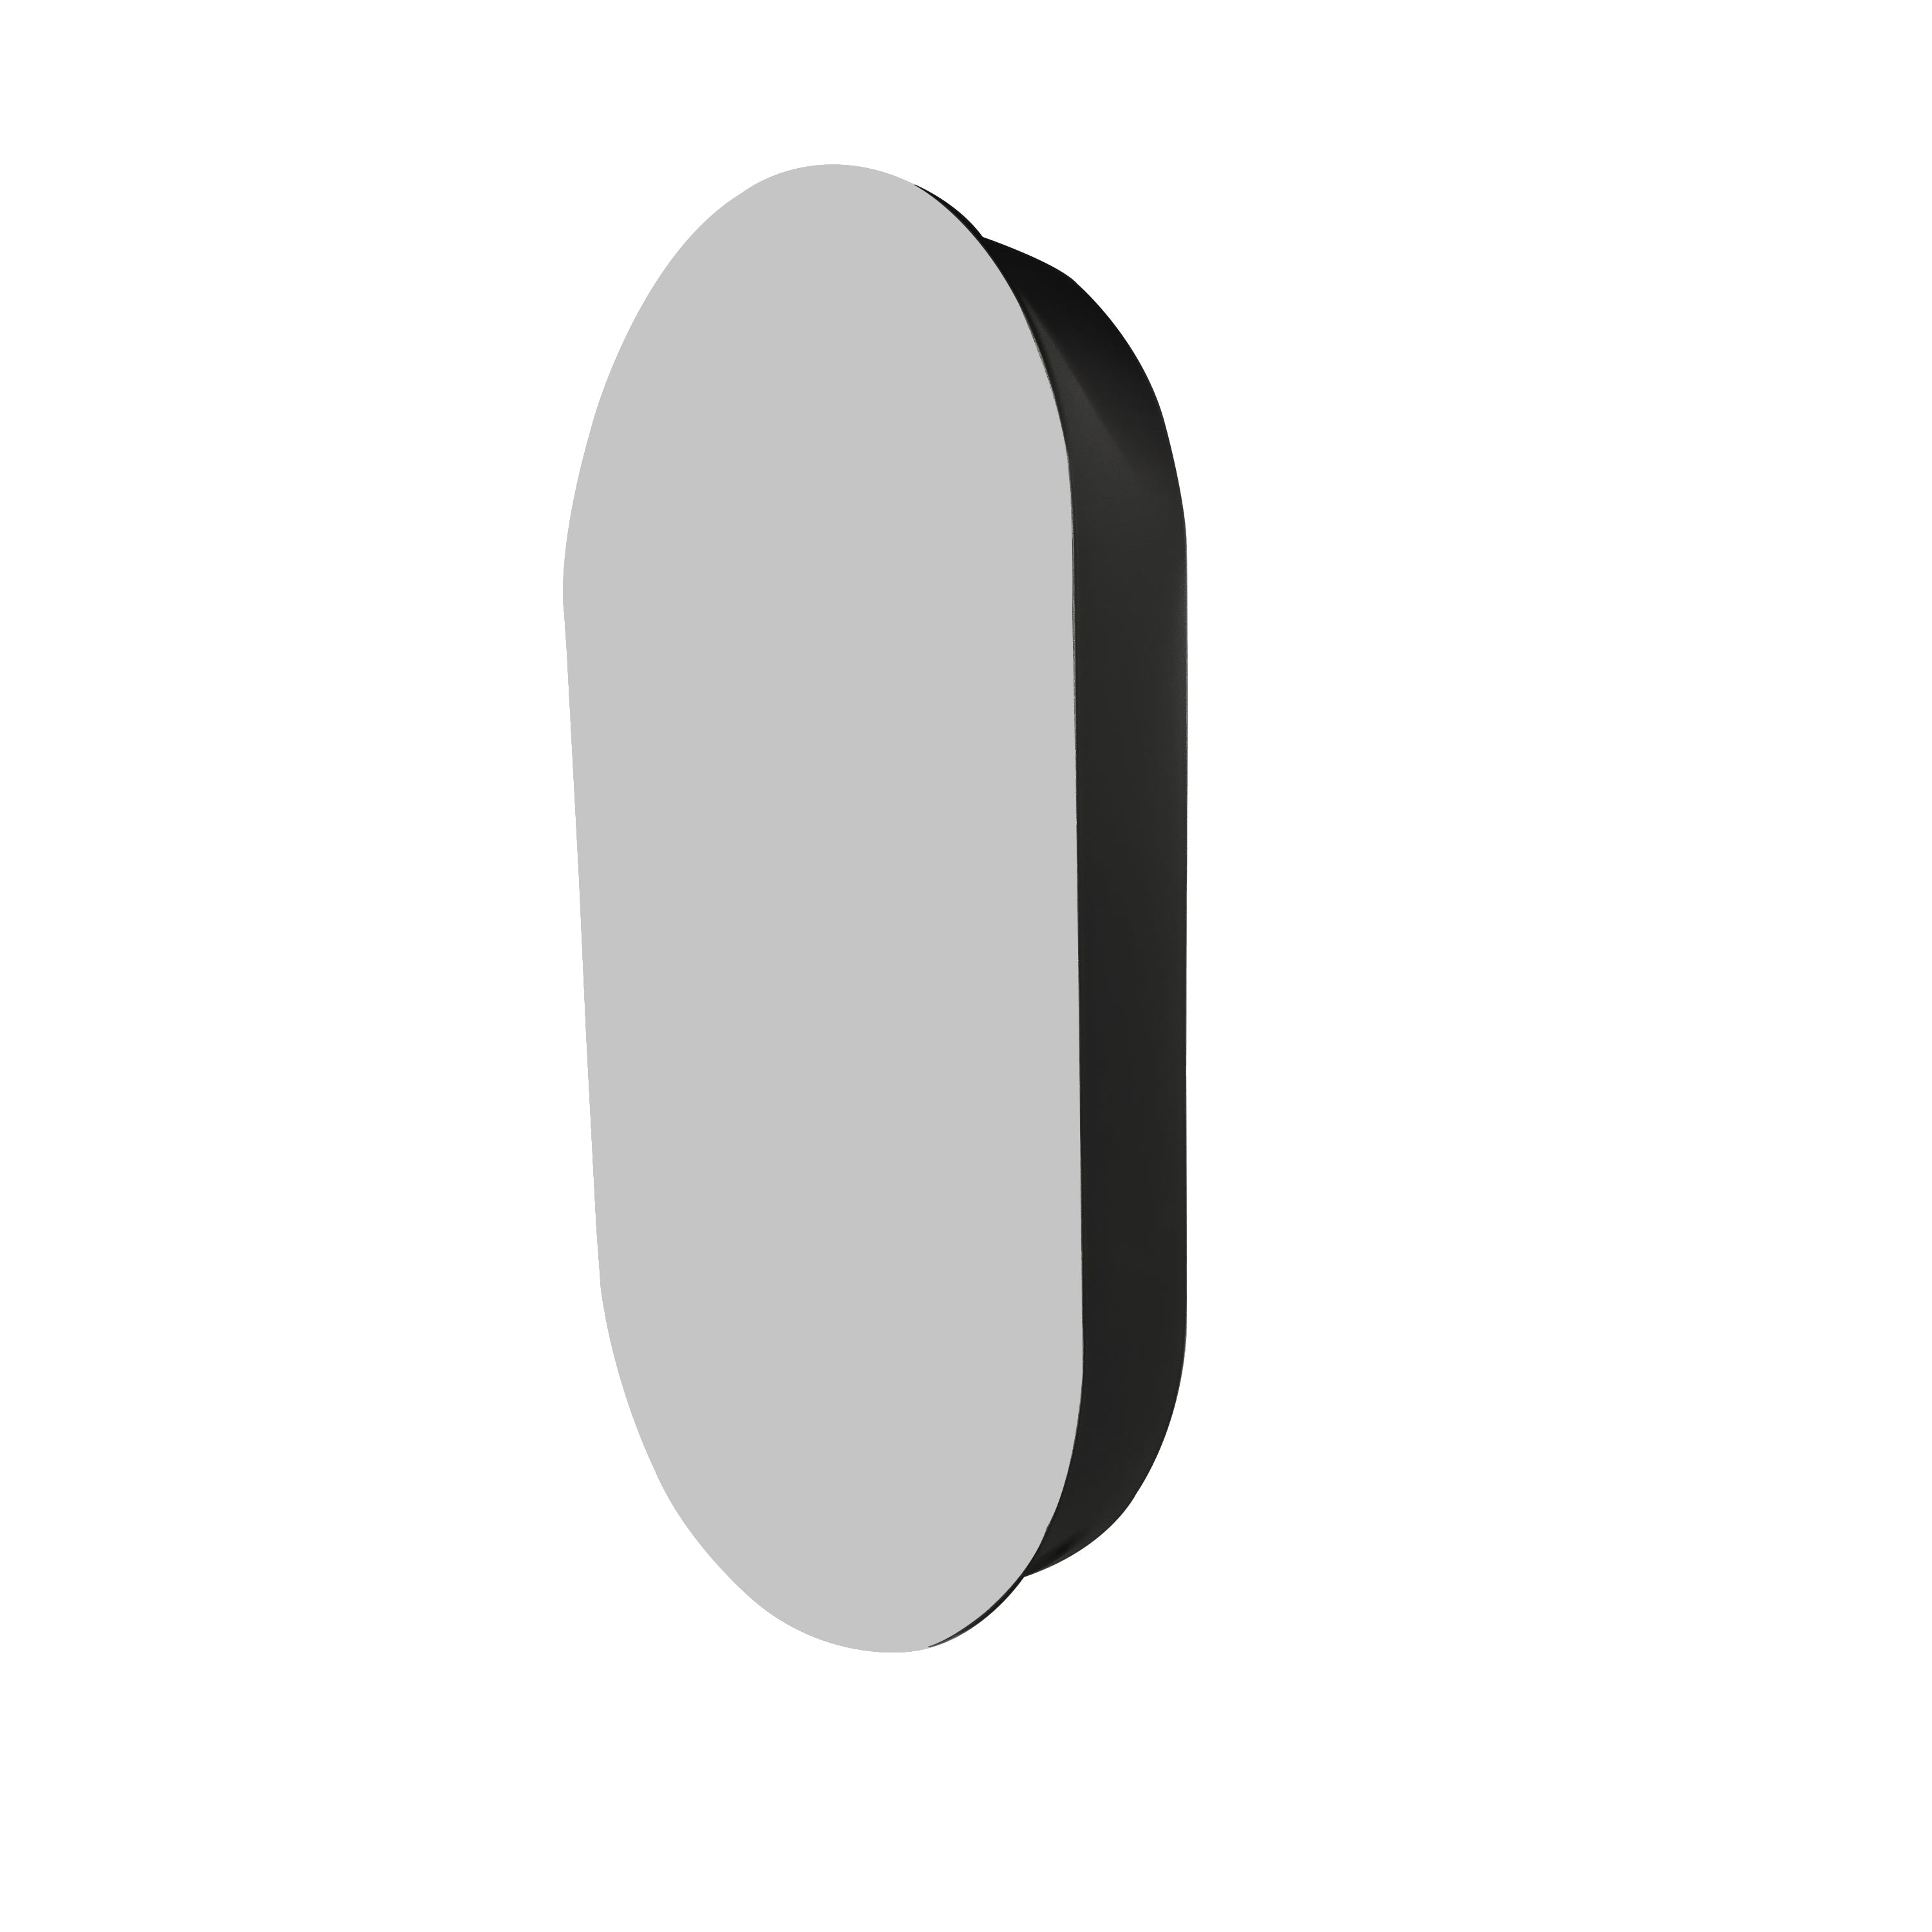 NEO OVAL ROUND MIRROR CABINET 500 X 950MM - 2 COLOURS